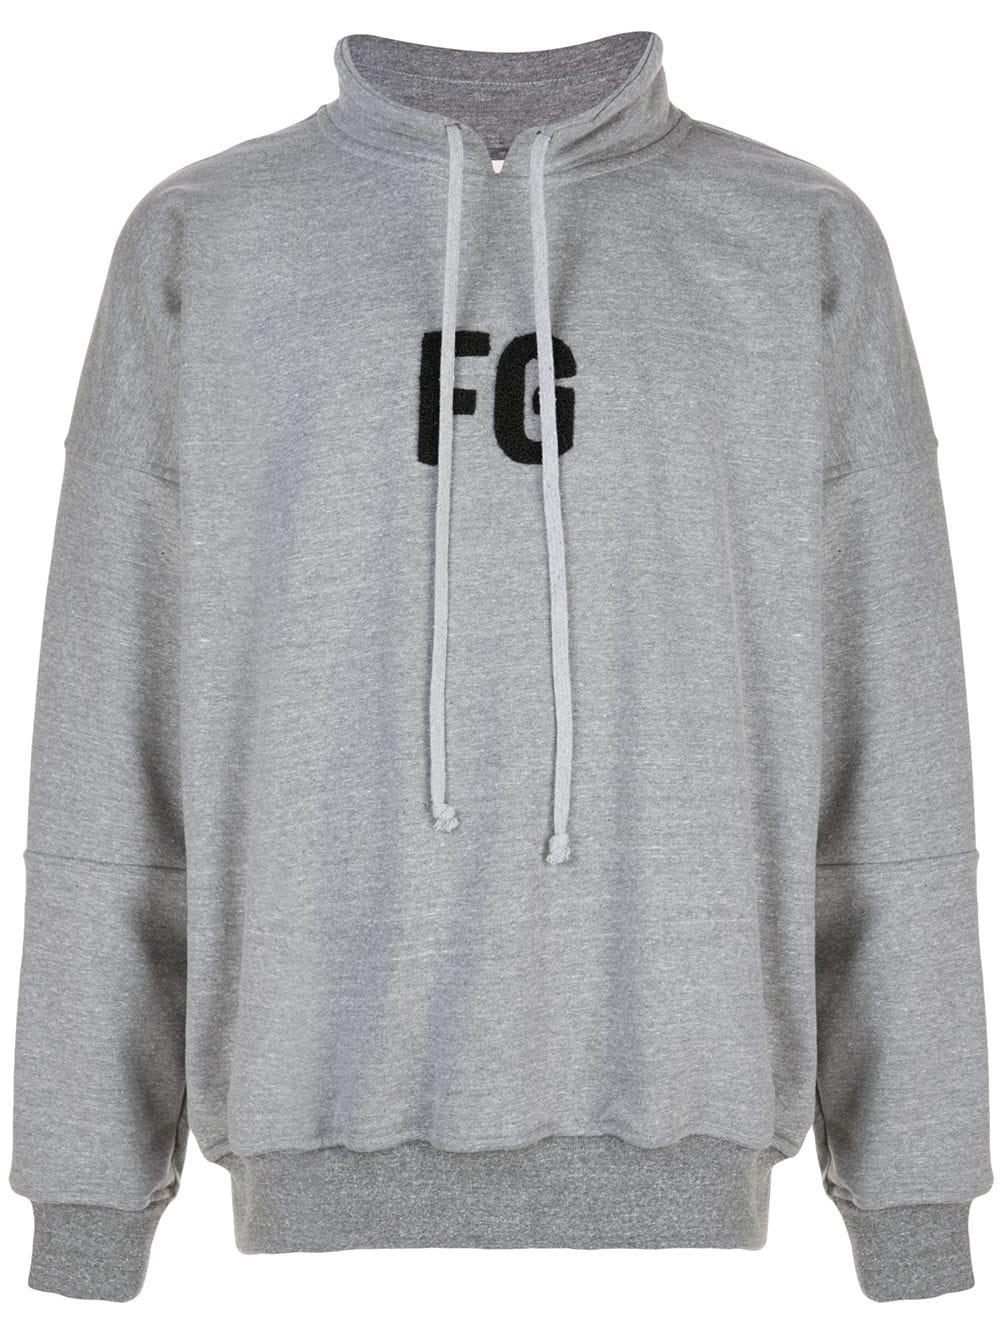 Fear Of God Cotton Logo Hoodie in Grey (Gray) for Men - Save 44% - Lyst